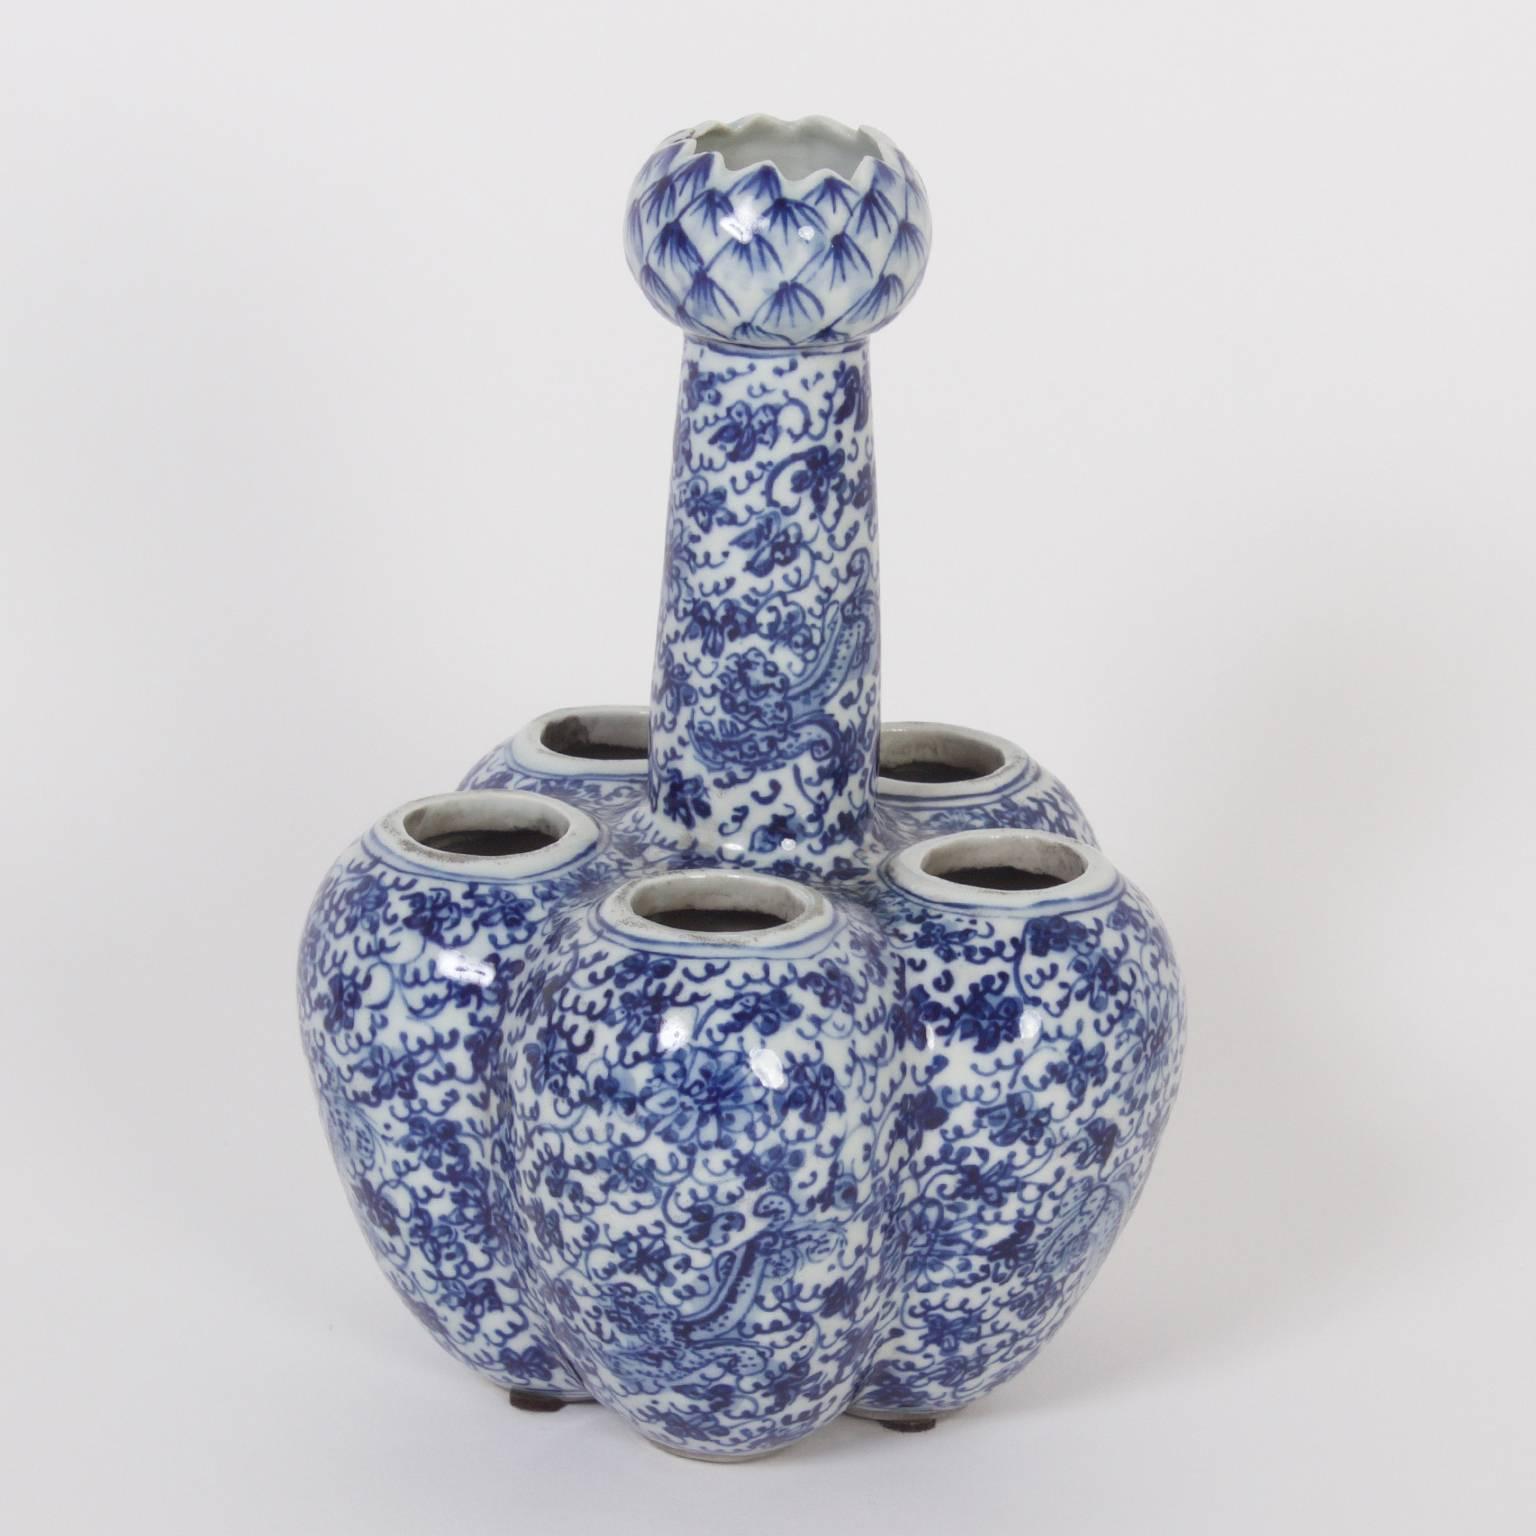 Rare pair of Chinese Export style blue and white porcelain tulipieres, each with five openings in the base for tulips to bloom from bulbs with a watering spout in the center. Decorated in a lovely, intricate floral design throughout.